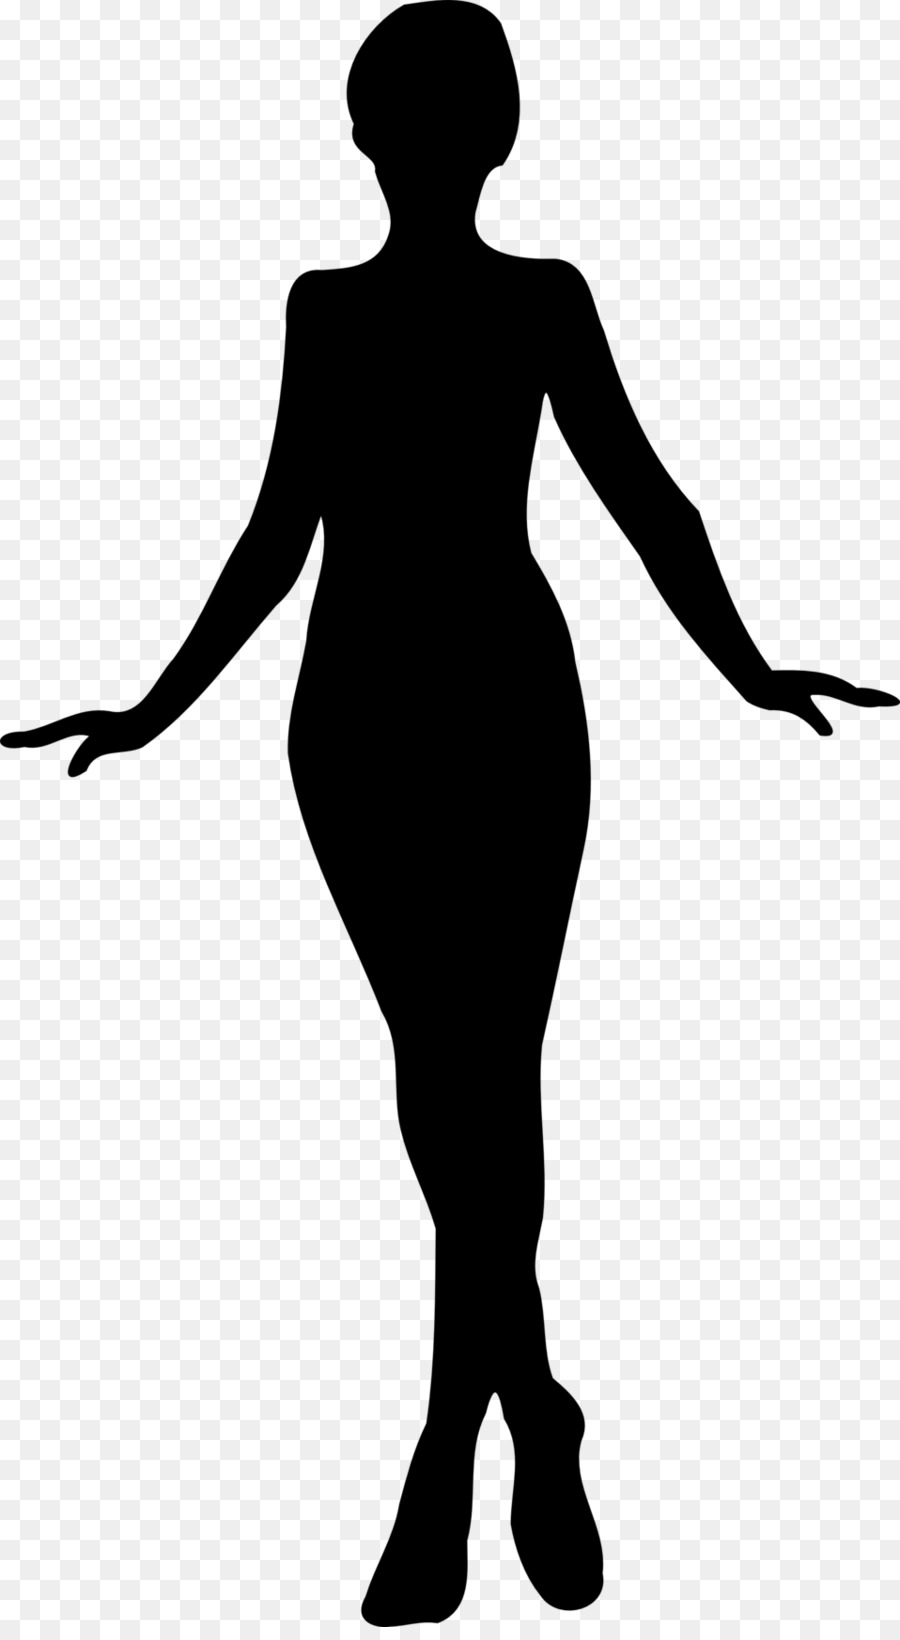 Woman Body Silhouette - Curvy woman Stock Photos, Illustrations and